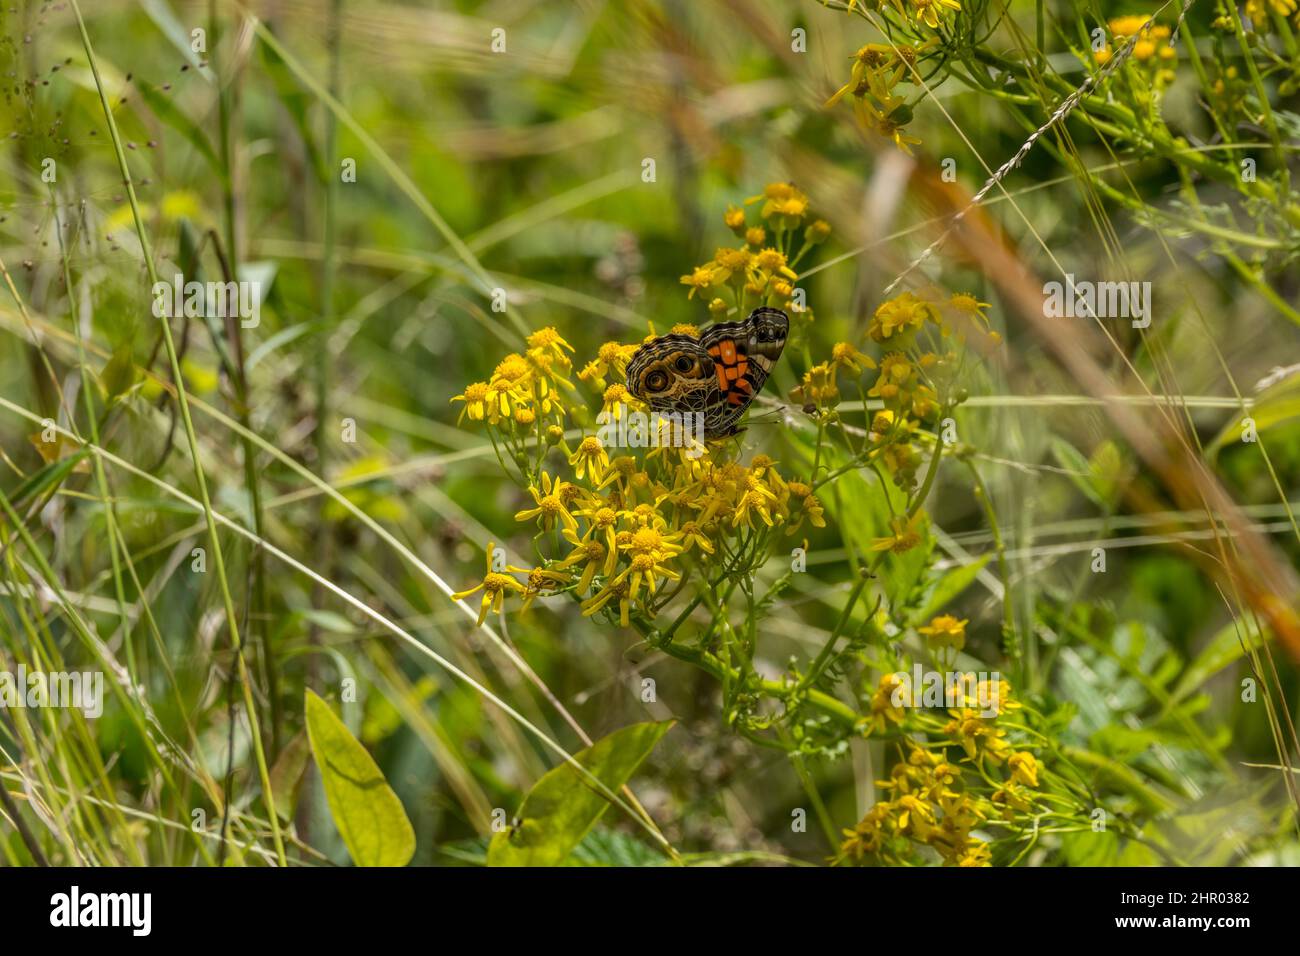 A American painted lady butterfly feeding on a butterweed wildflower in a field full of weeds and tall grasses on a sunny day in late spring Stock Photo